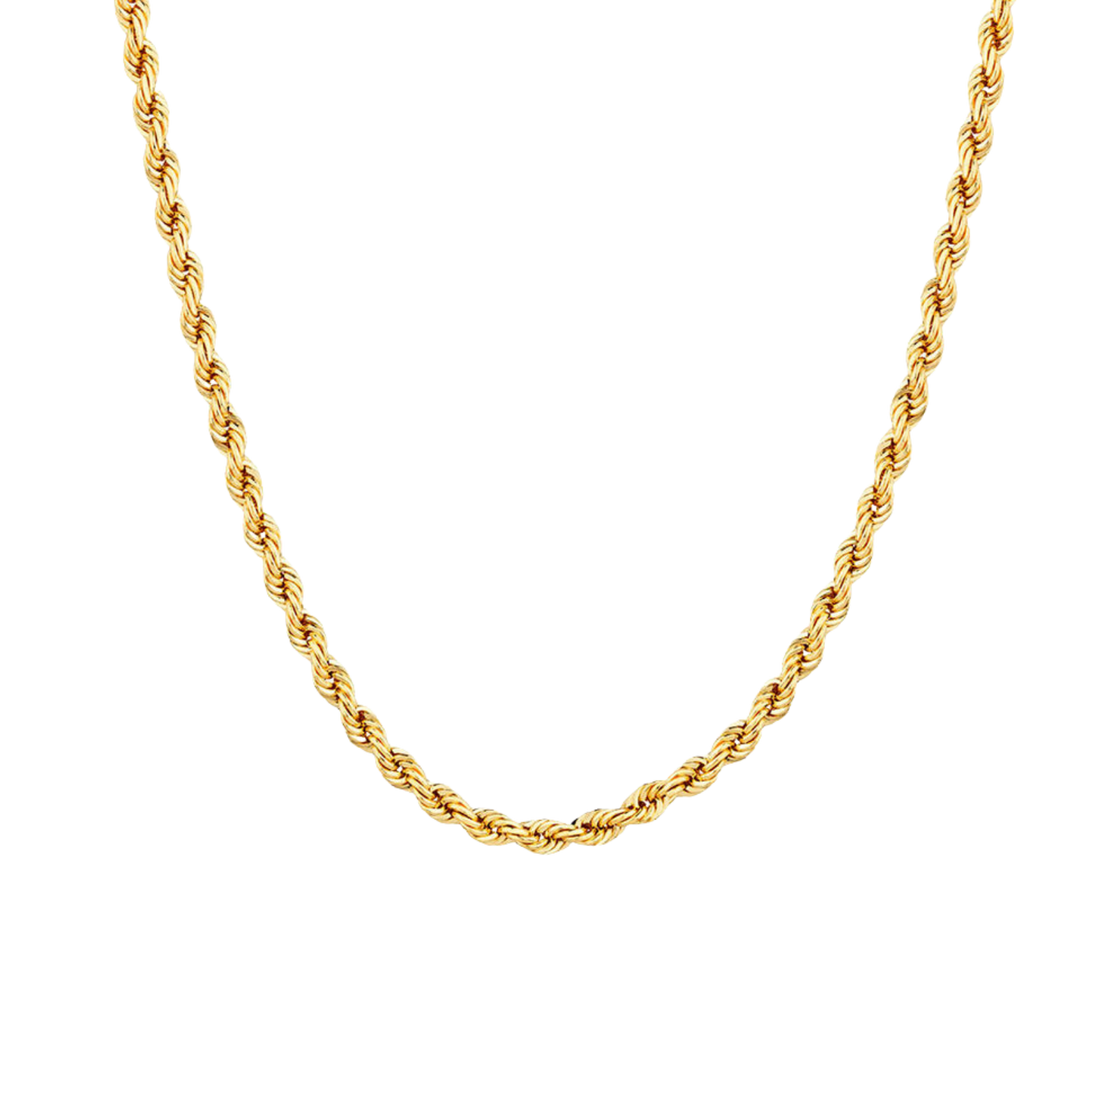 gold rope chain canada, buy gold rope chain 3.5mm canada, gold rope chain 3.5mm mens